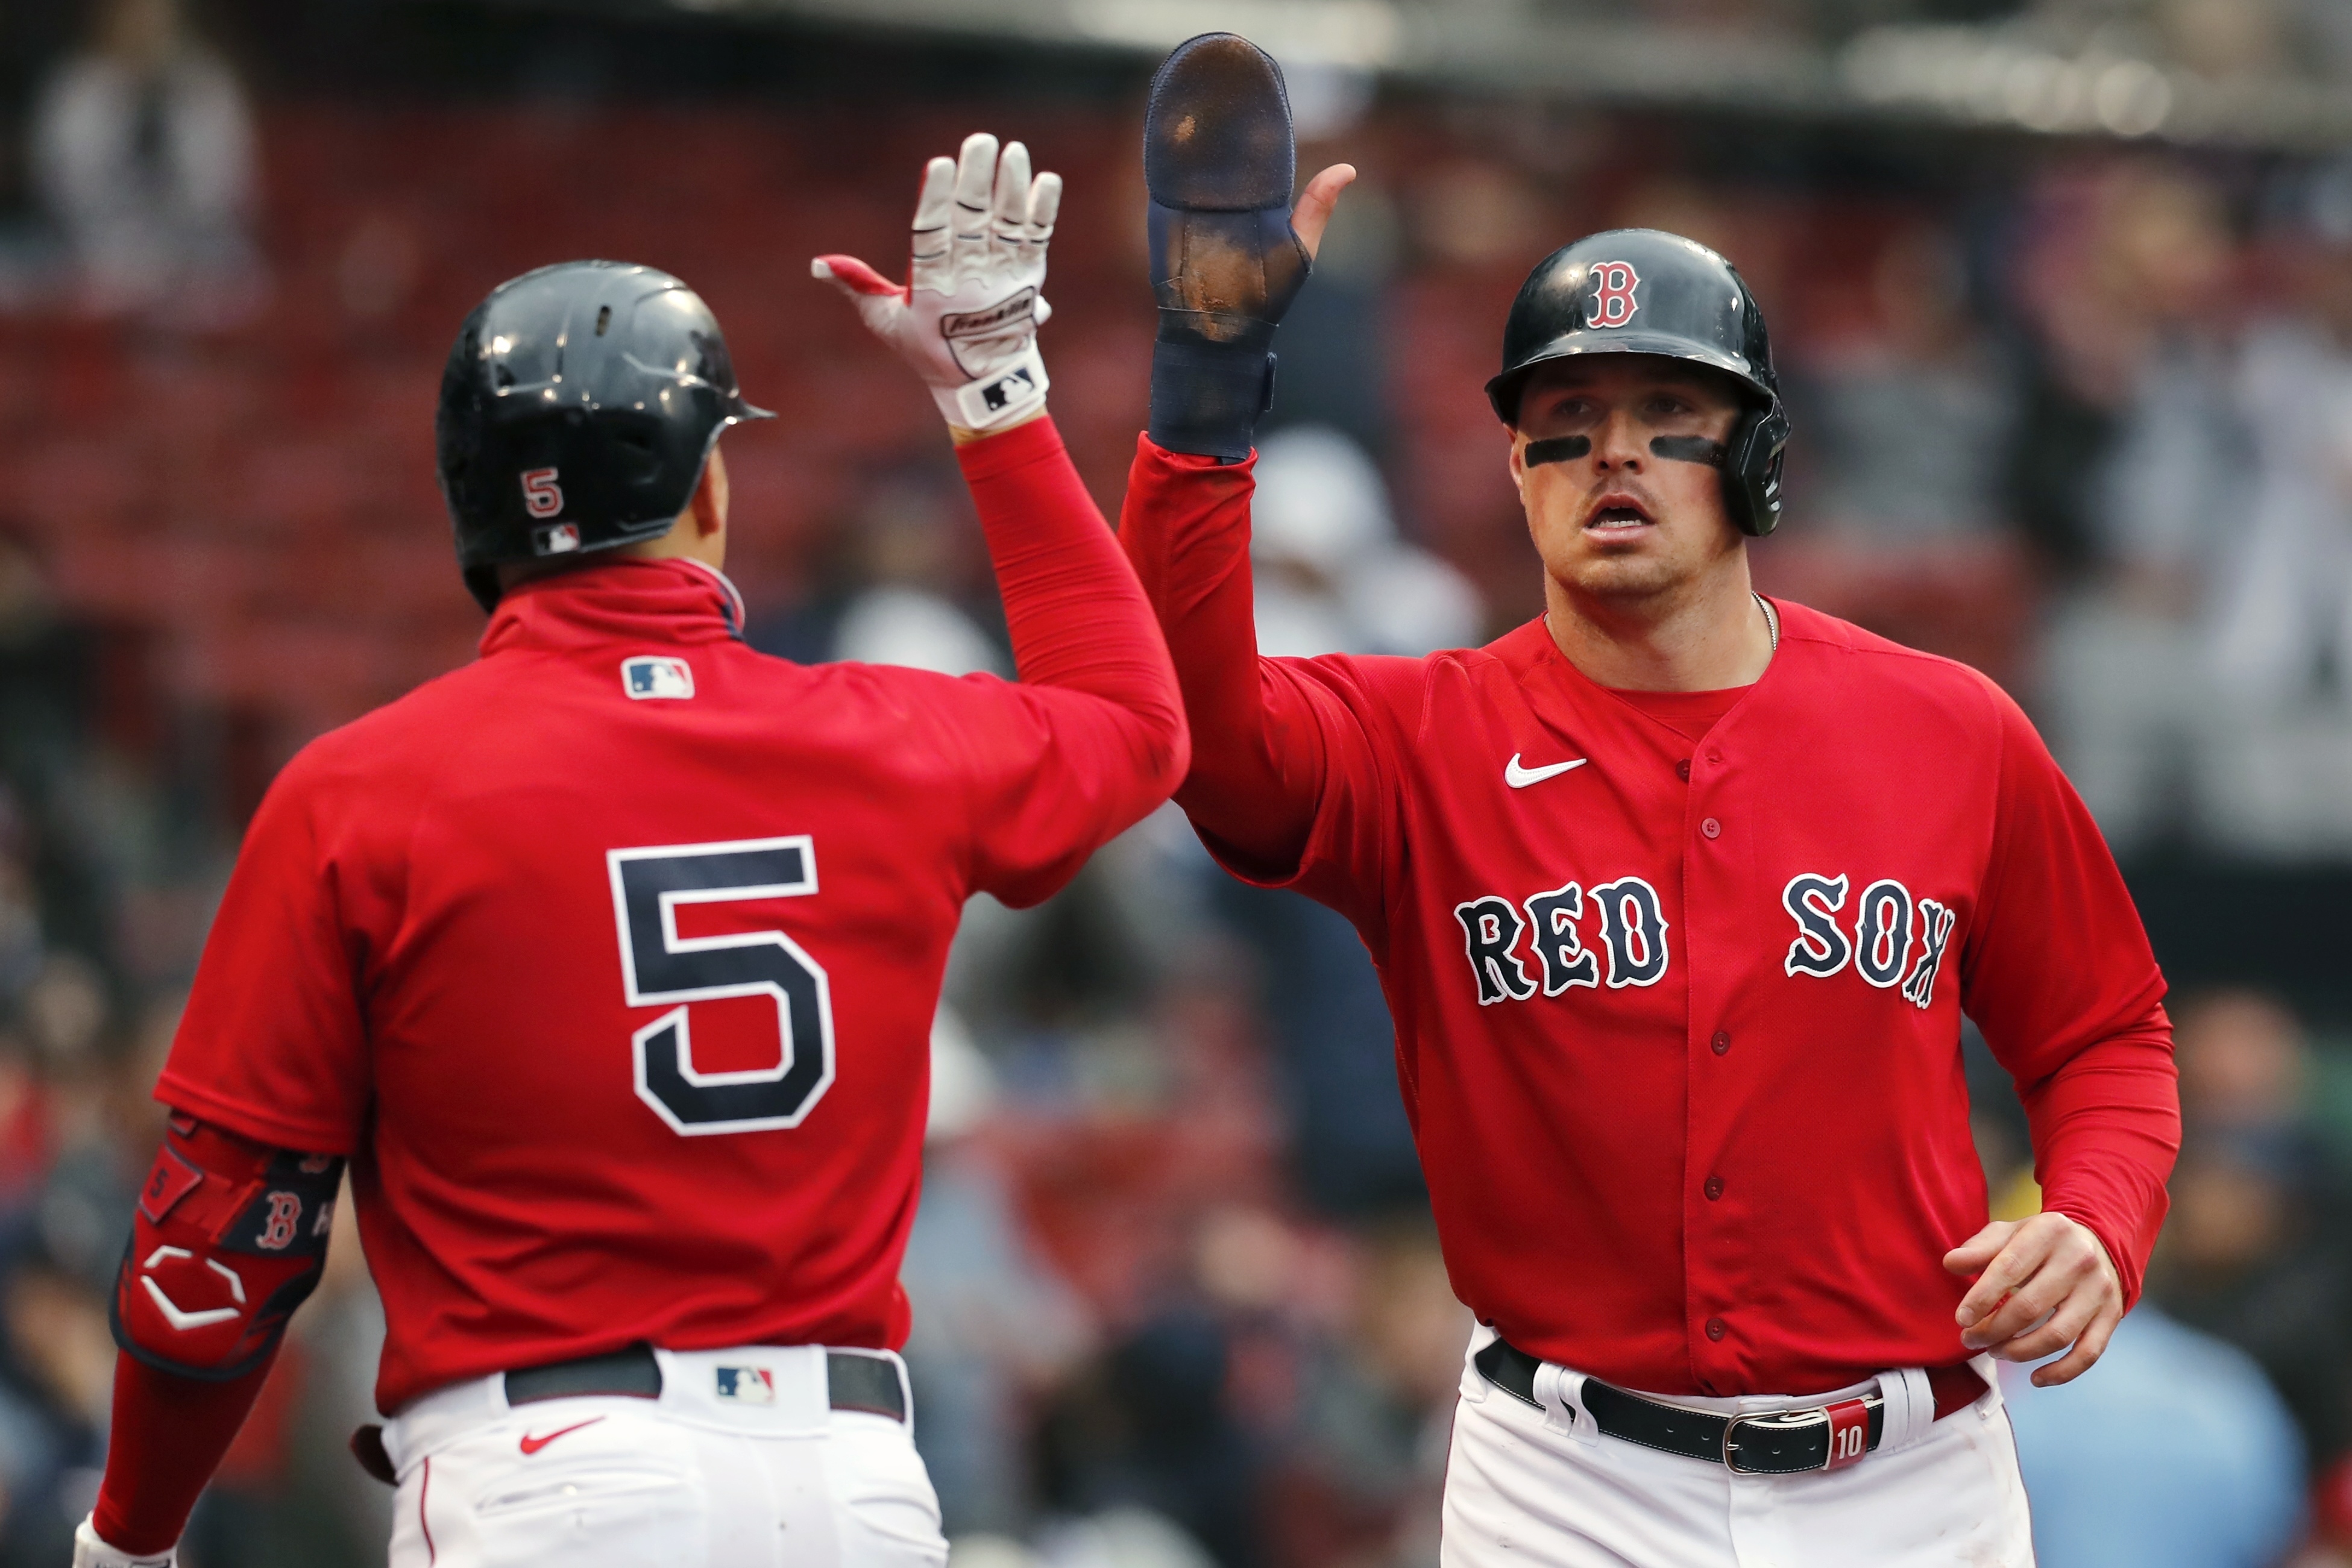 Red Sox catcher Christian Vazquez says he's done wearing a sliding